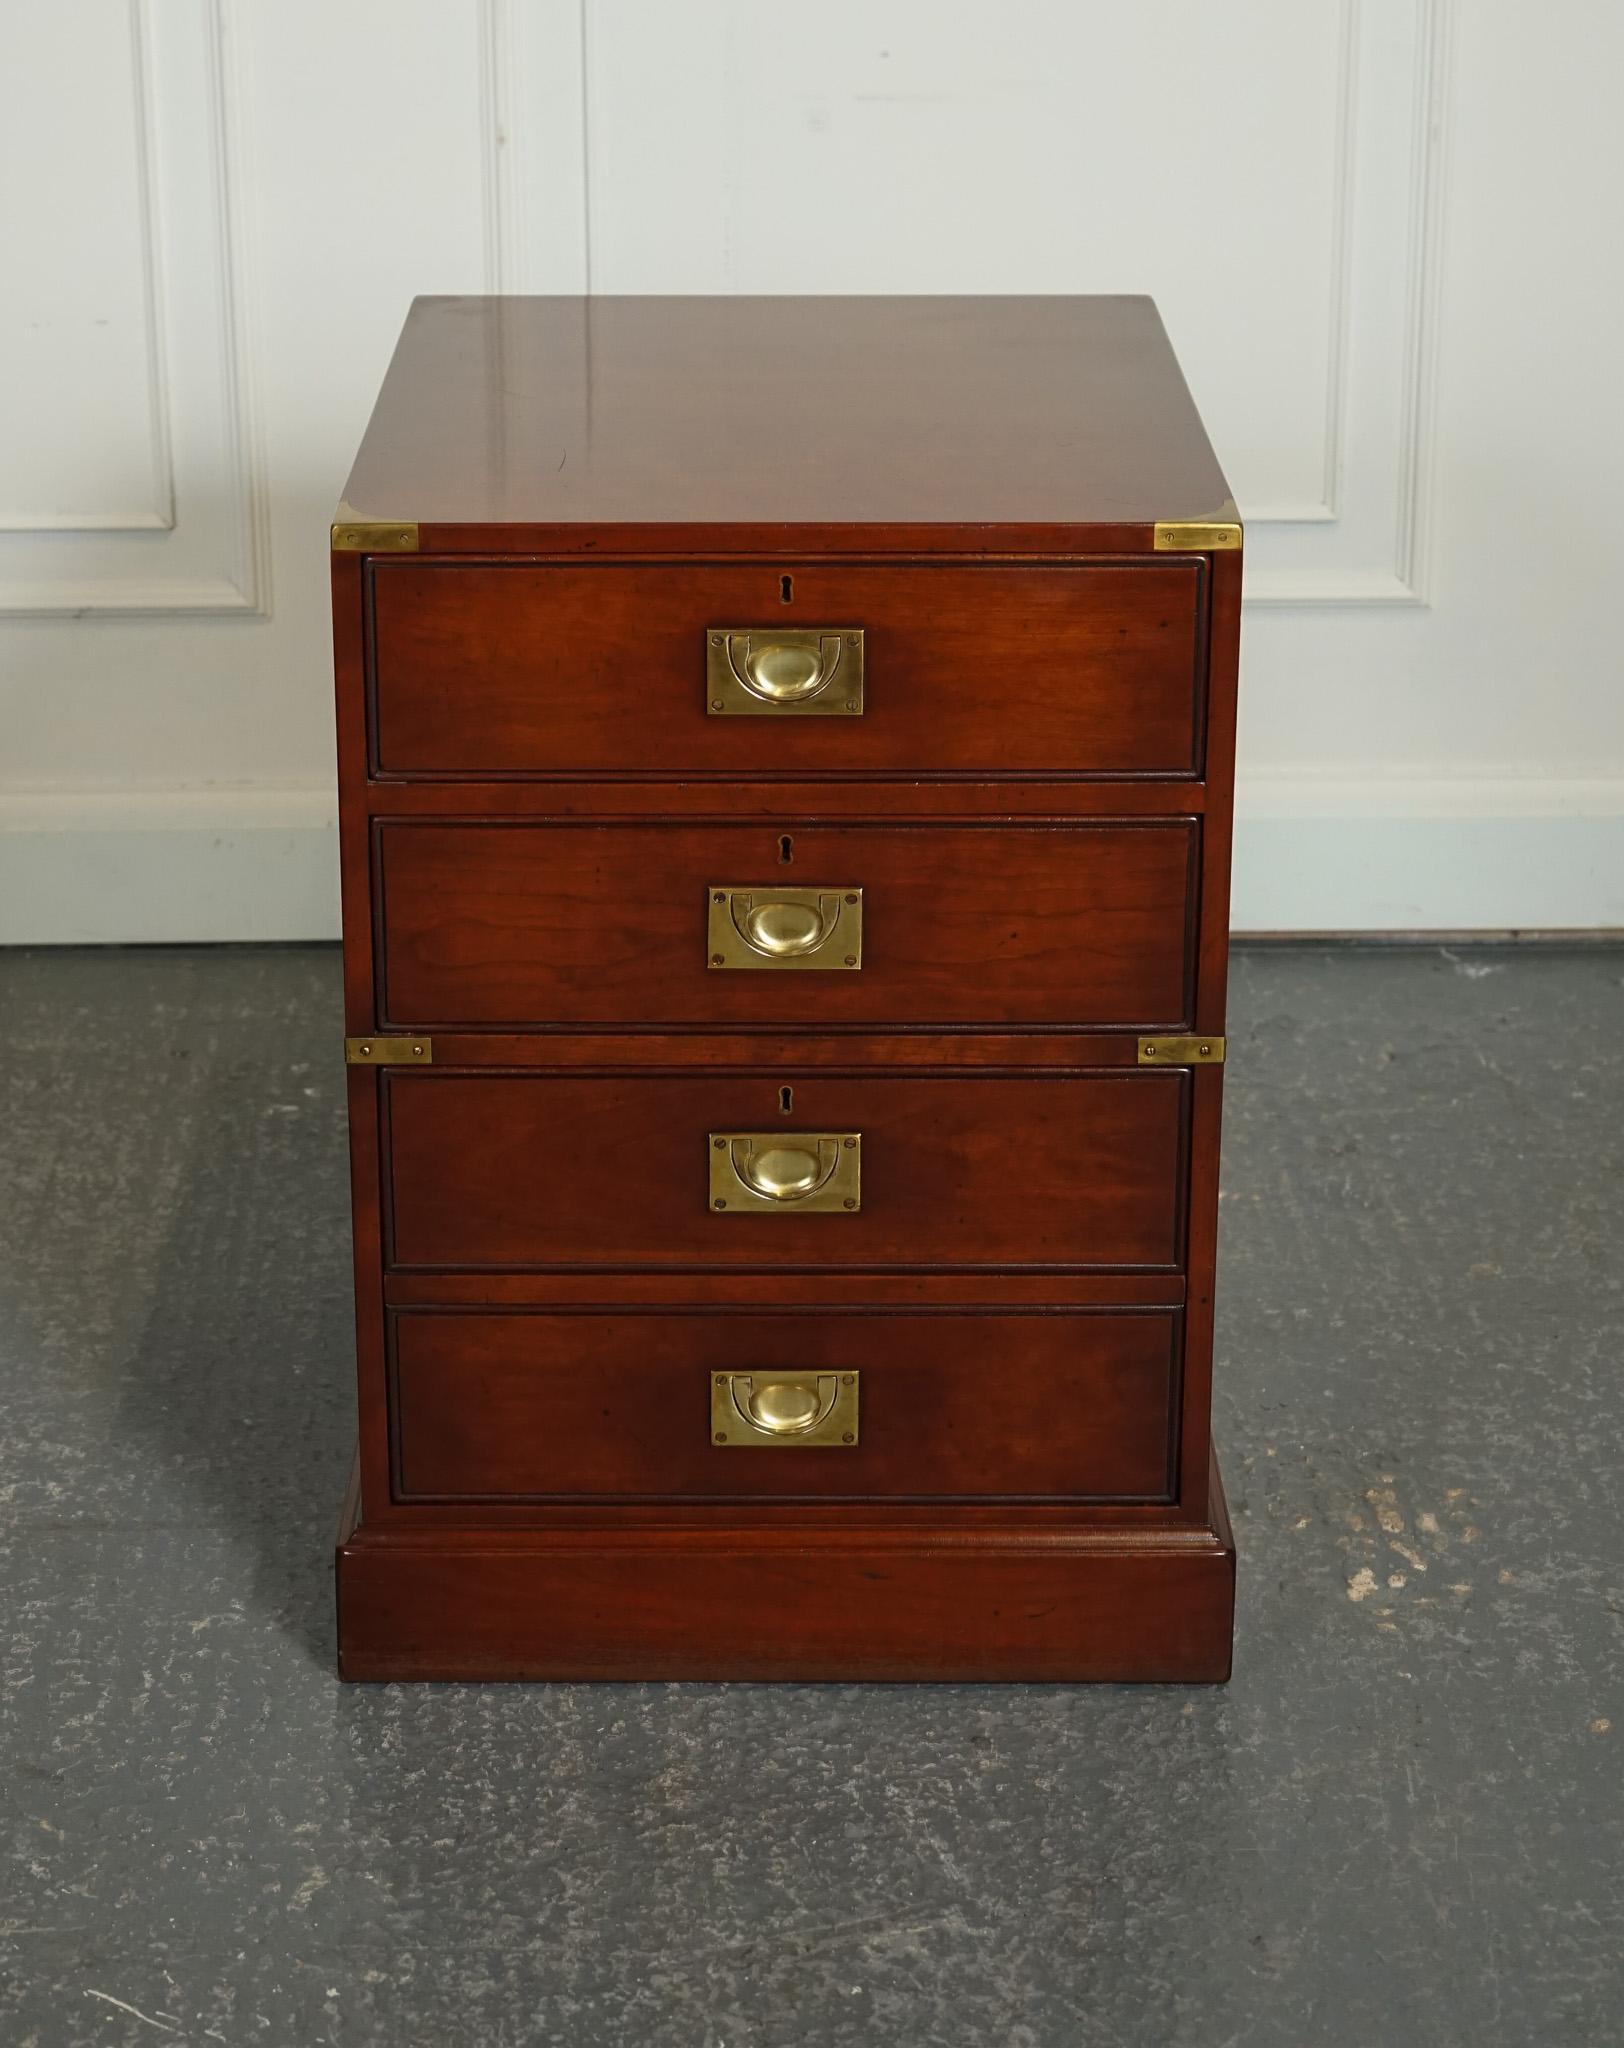 British KENNEDY HARRODS MILiTARY CAMPAIGN OFFICE DRAWERS FILLING CABINET J1 (2/2)